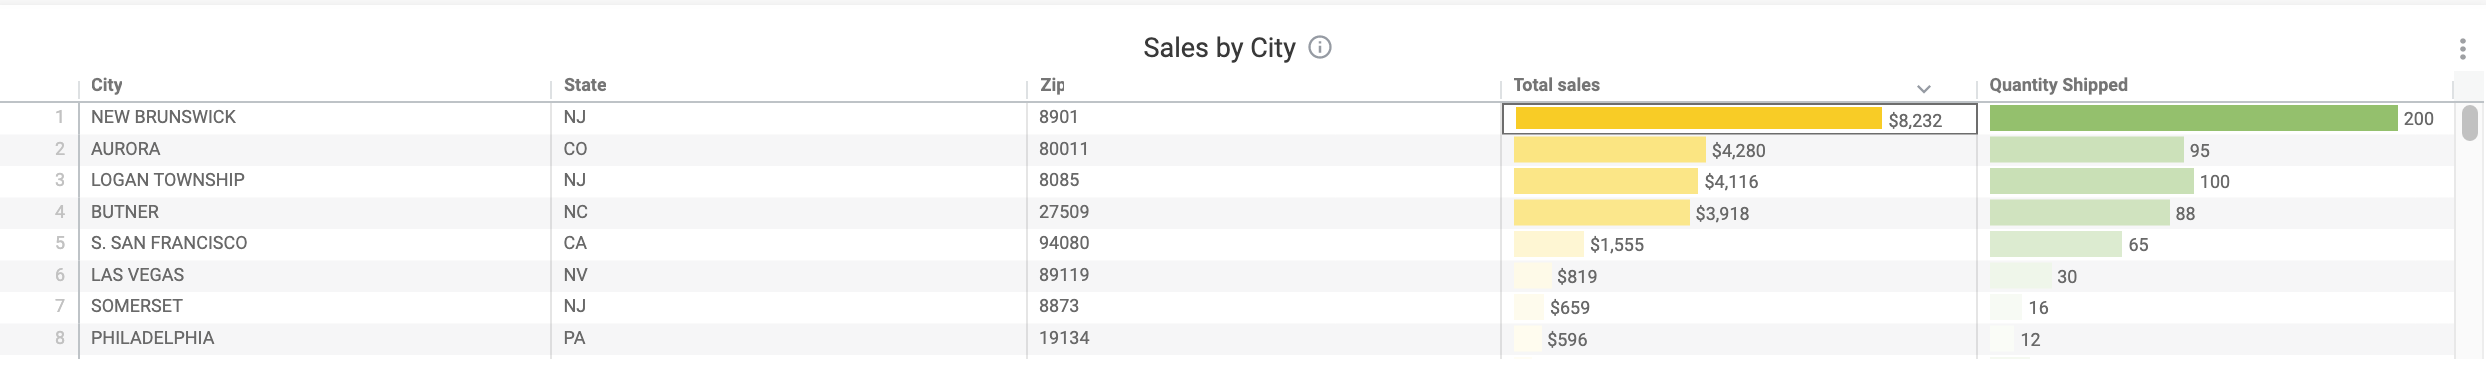 Sales_by_City.png